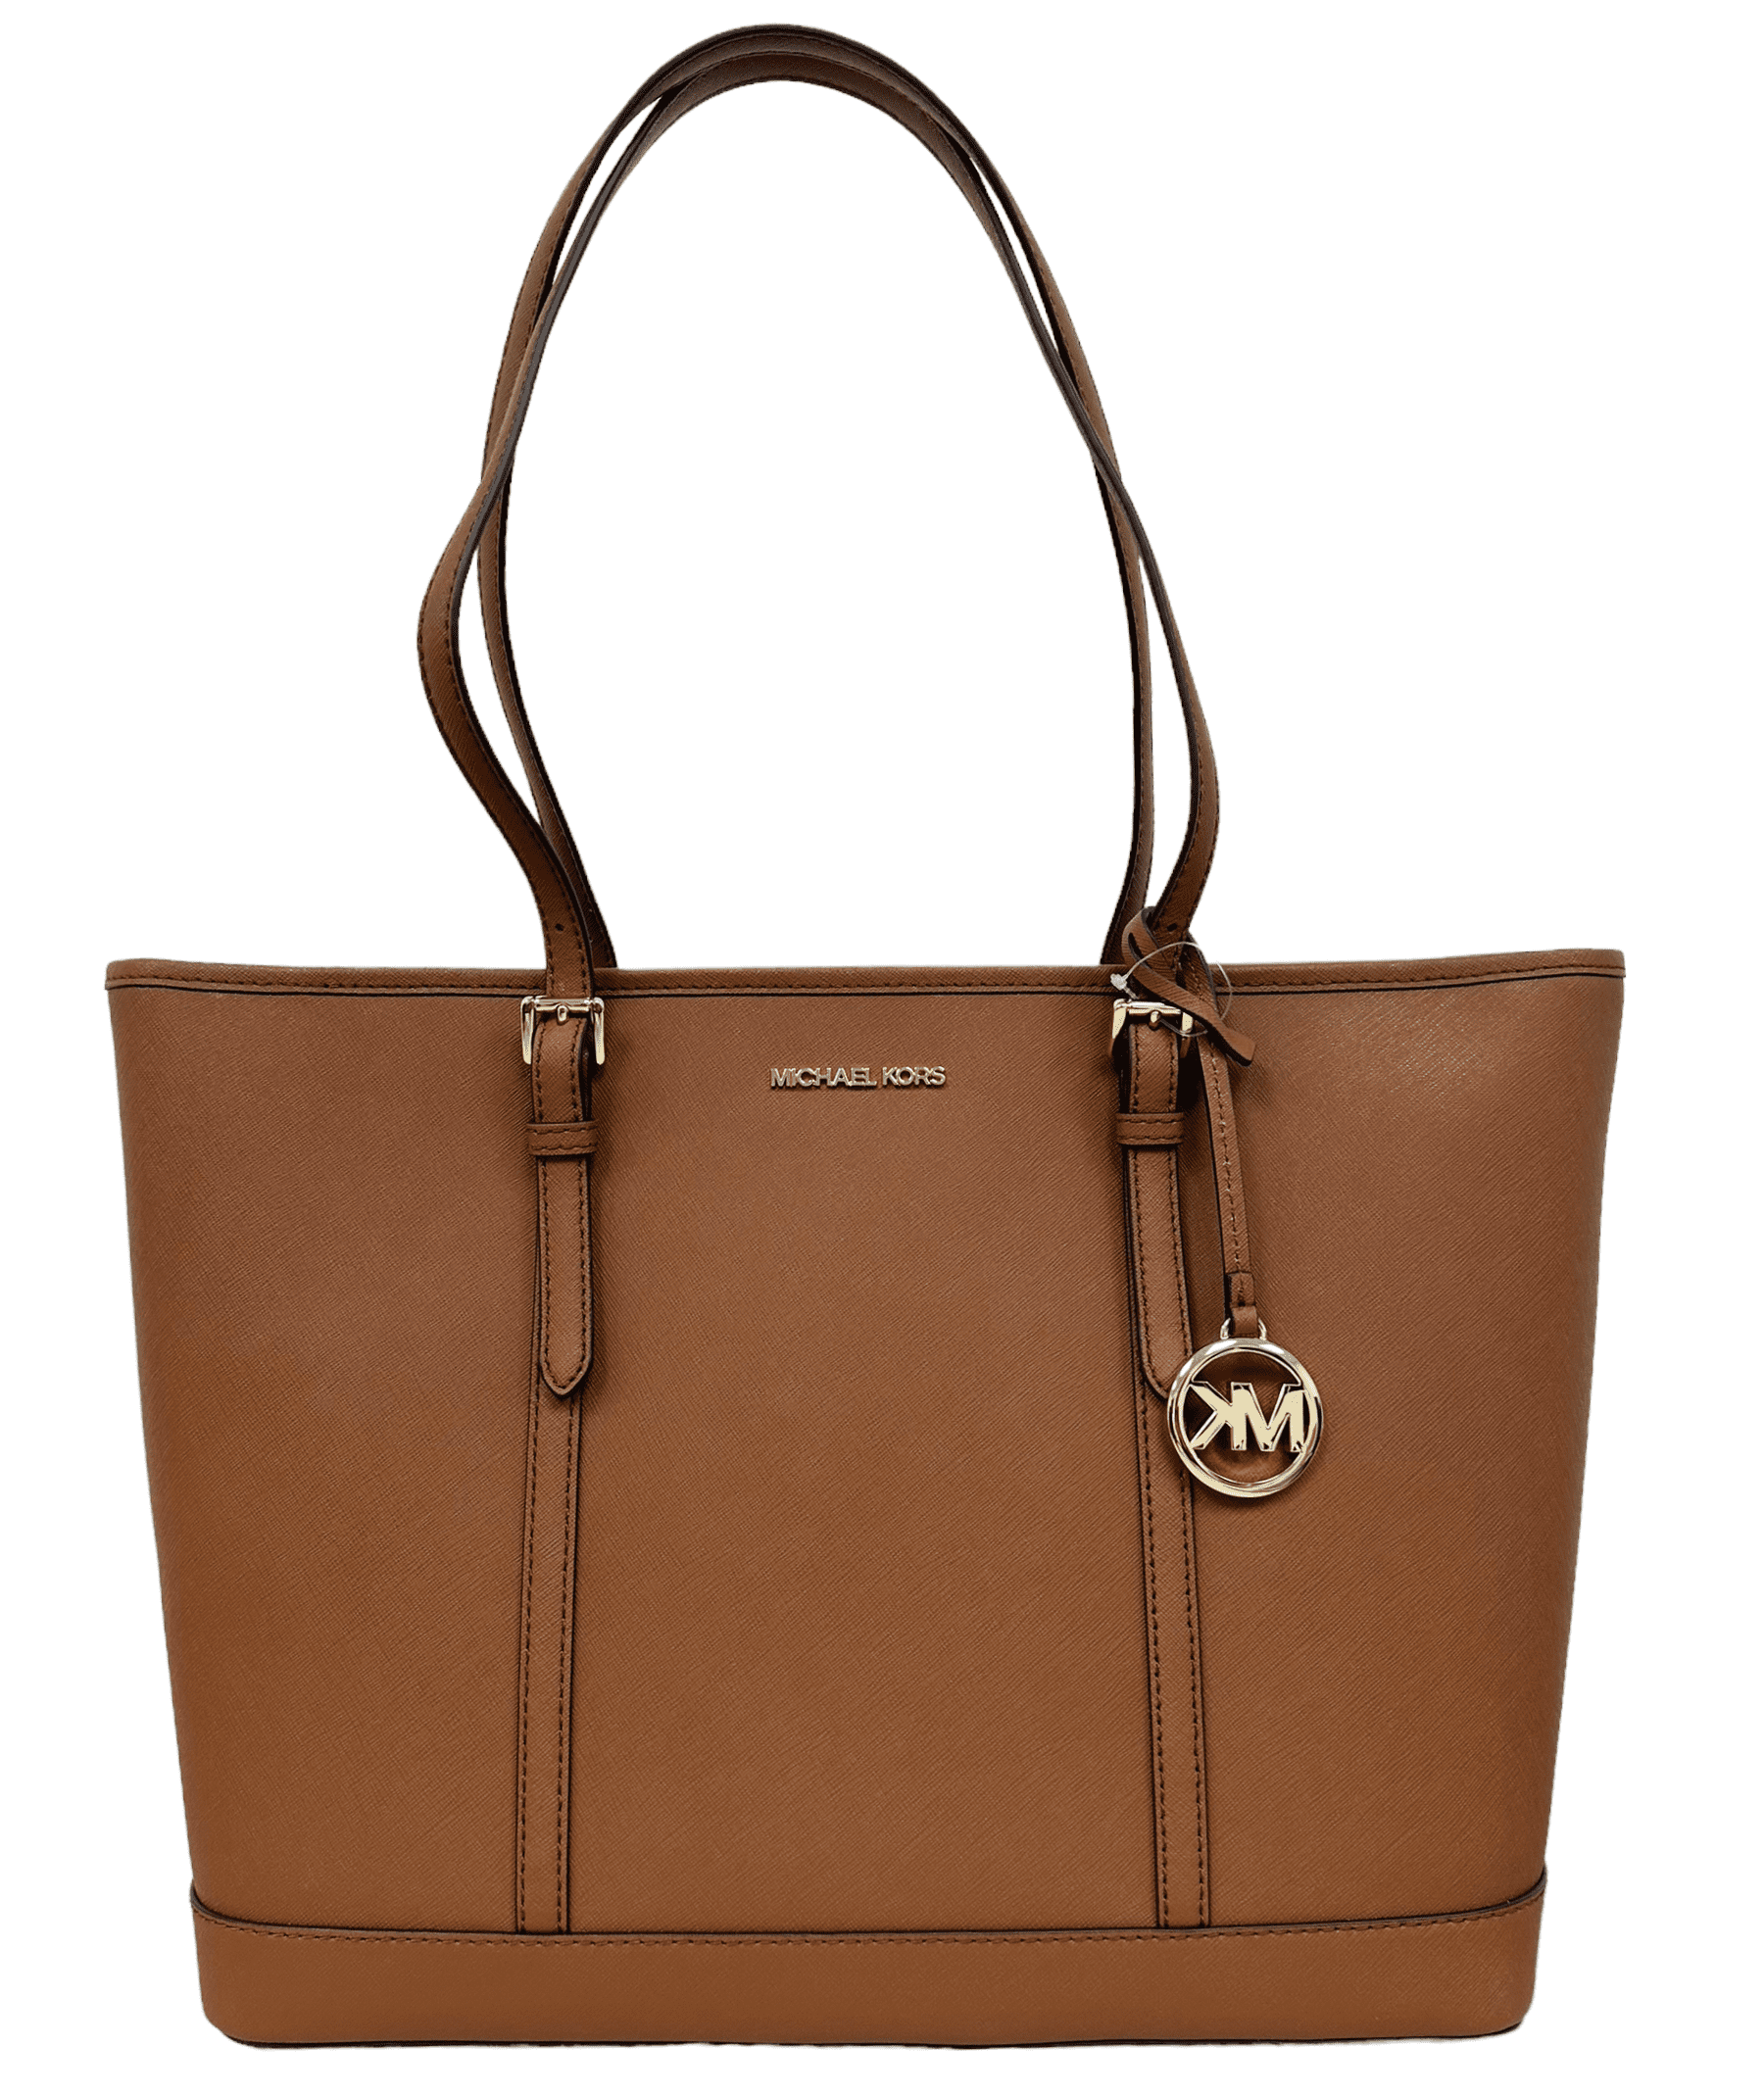 Michael Kors Sady Jet Set Travel Large Top Top Tote Saffiano Leather Luggage  